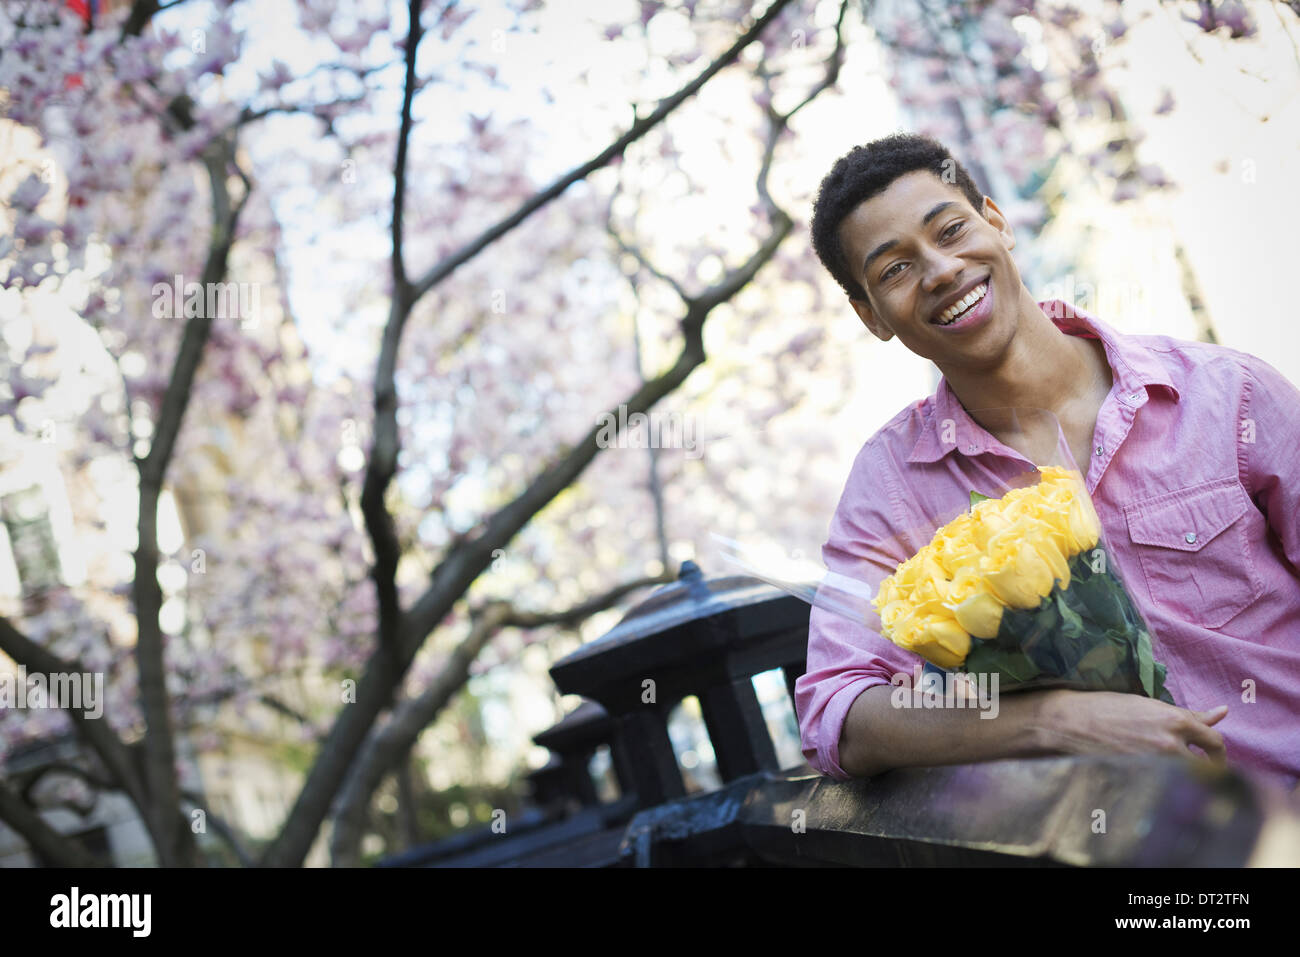 A young man in the park in spring holding a bunch of yellow roses Stock Photo